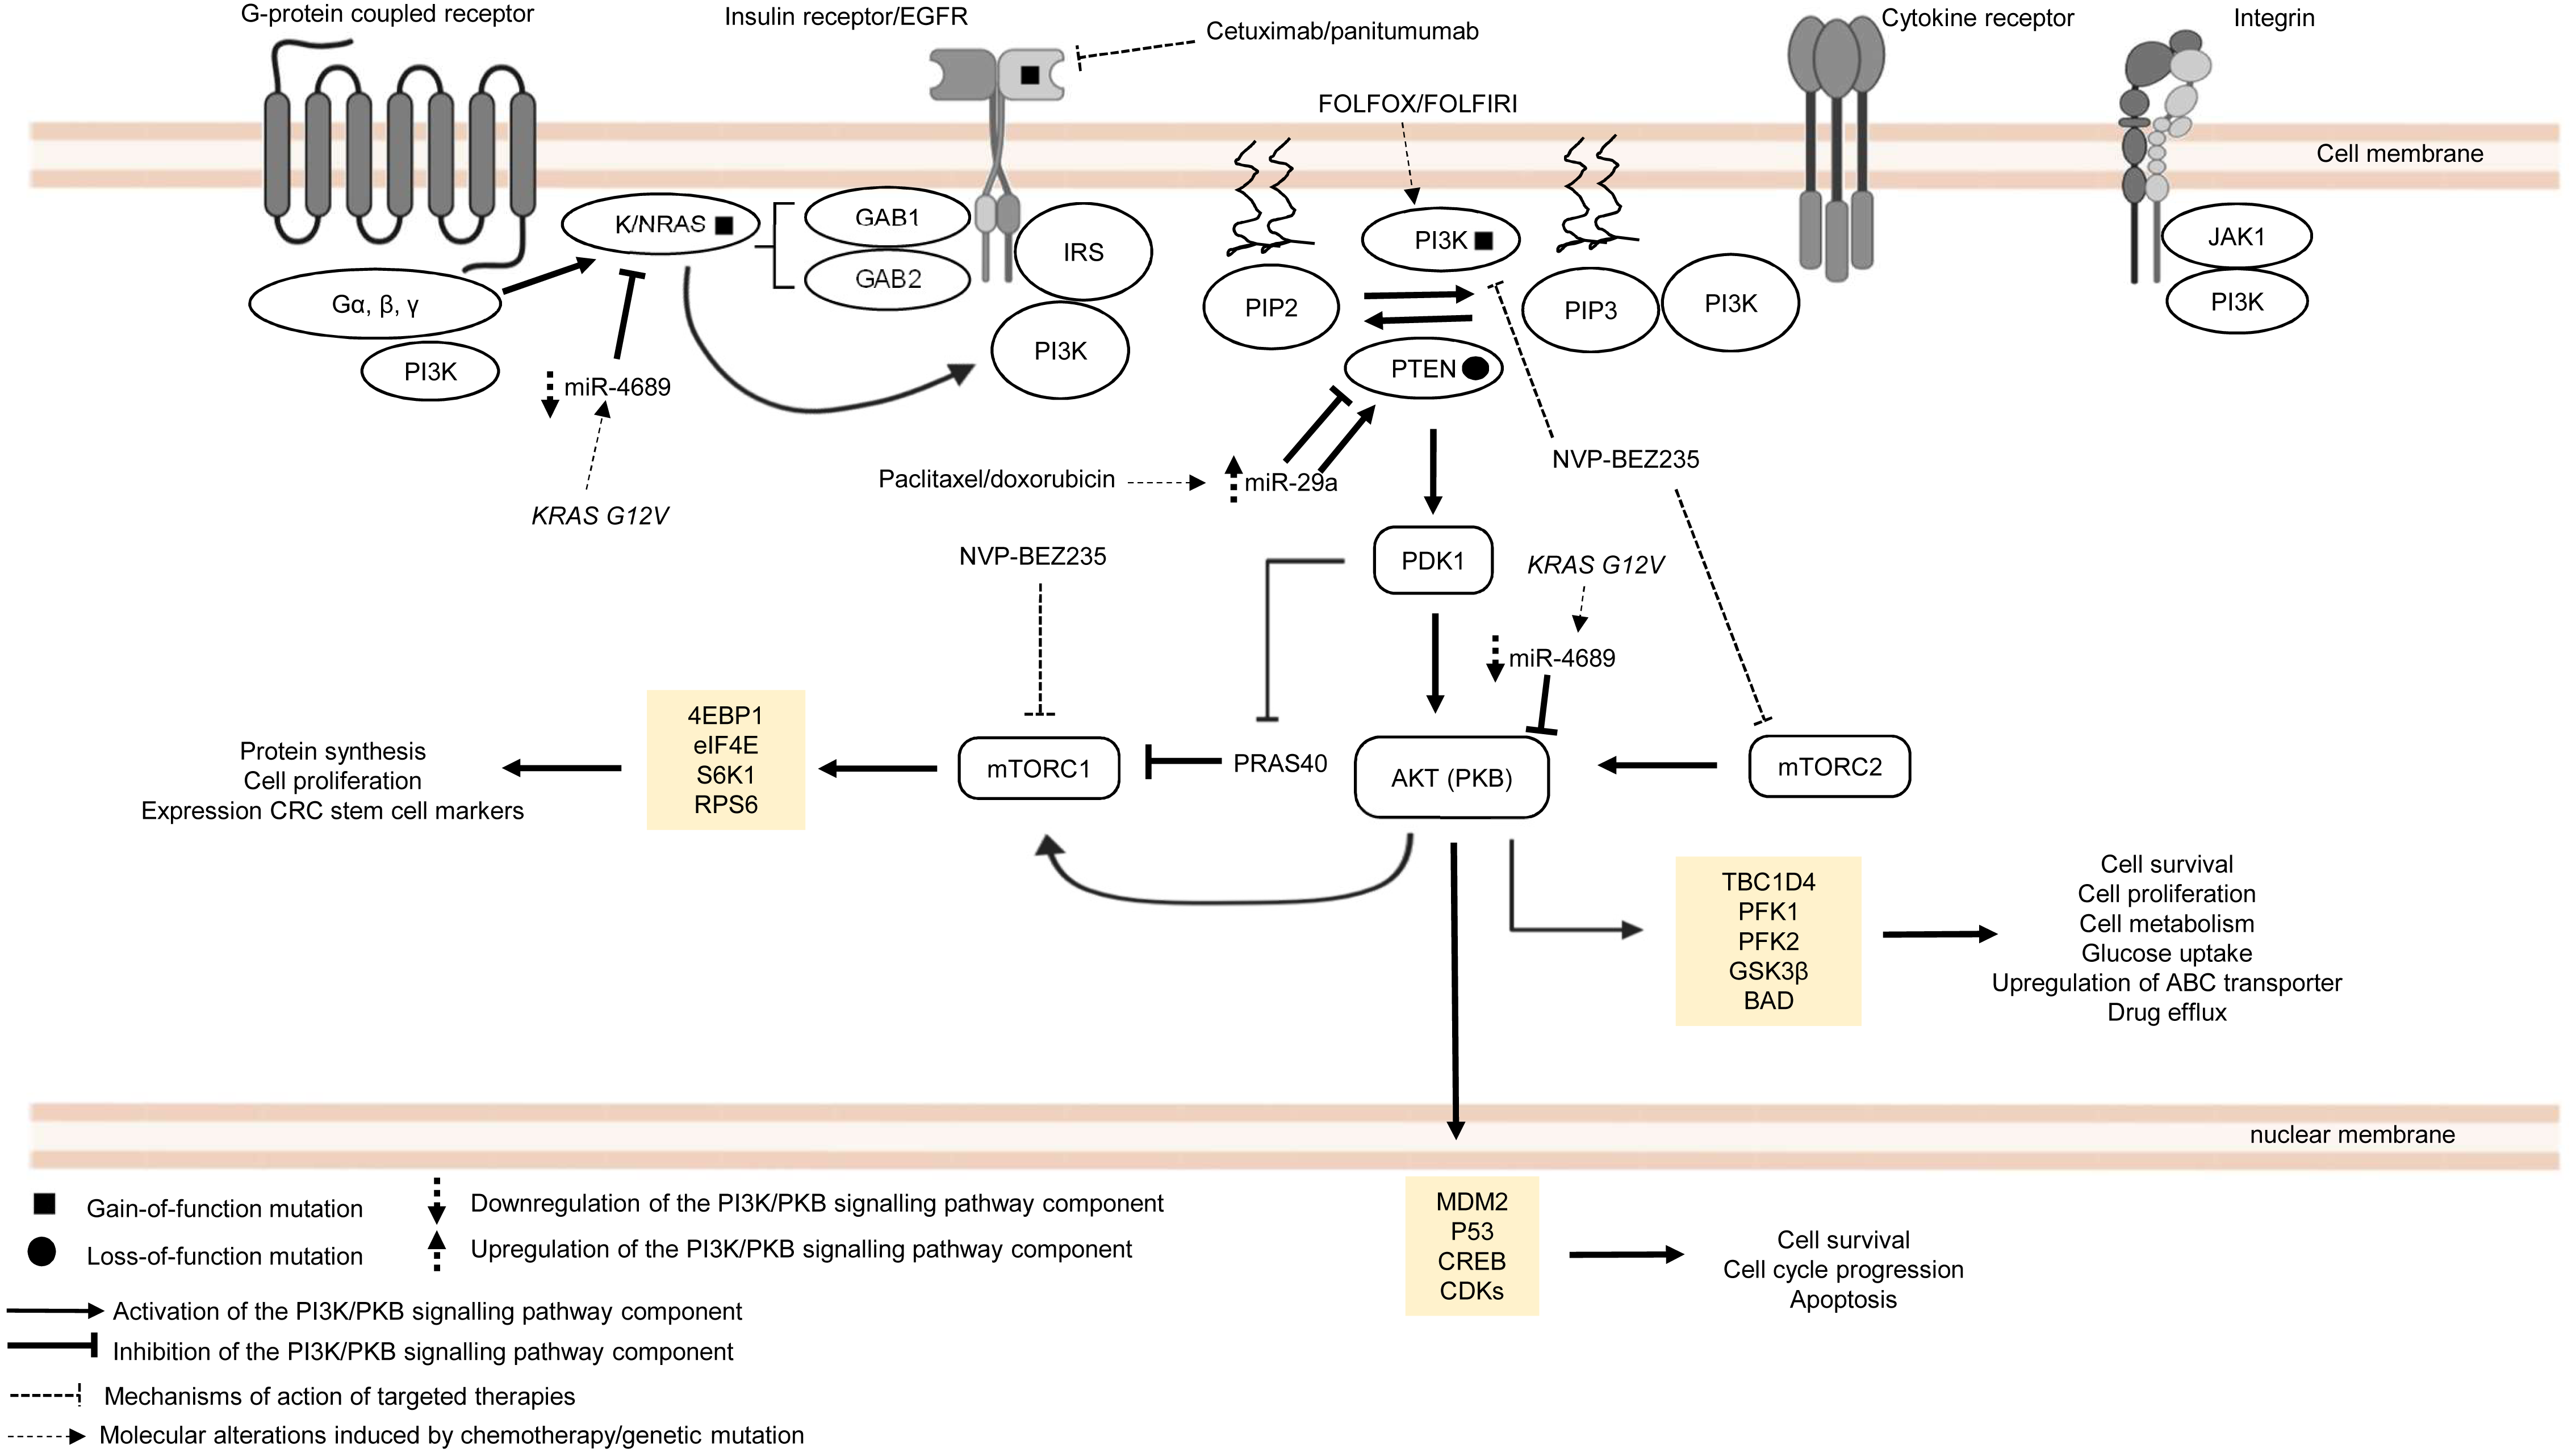 Regulation of signal transduction pathways in colorectal cancer 